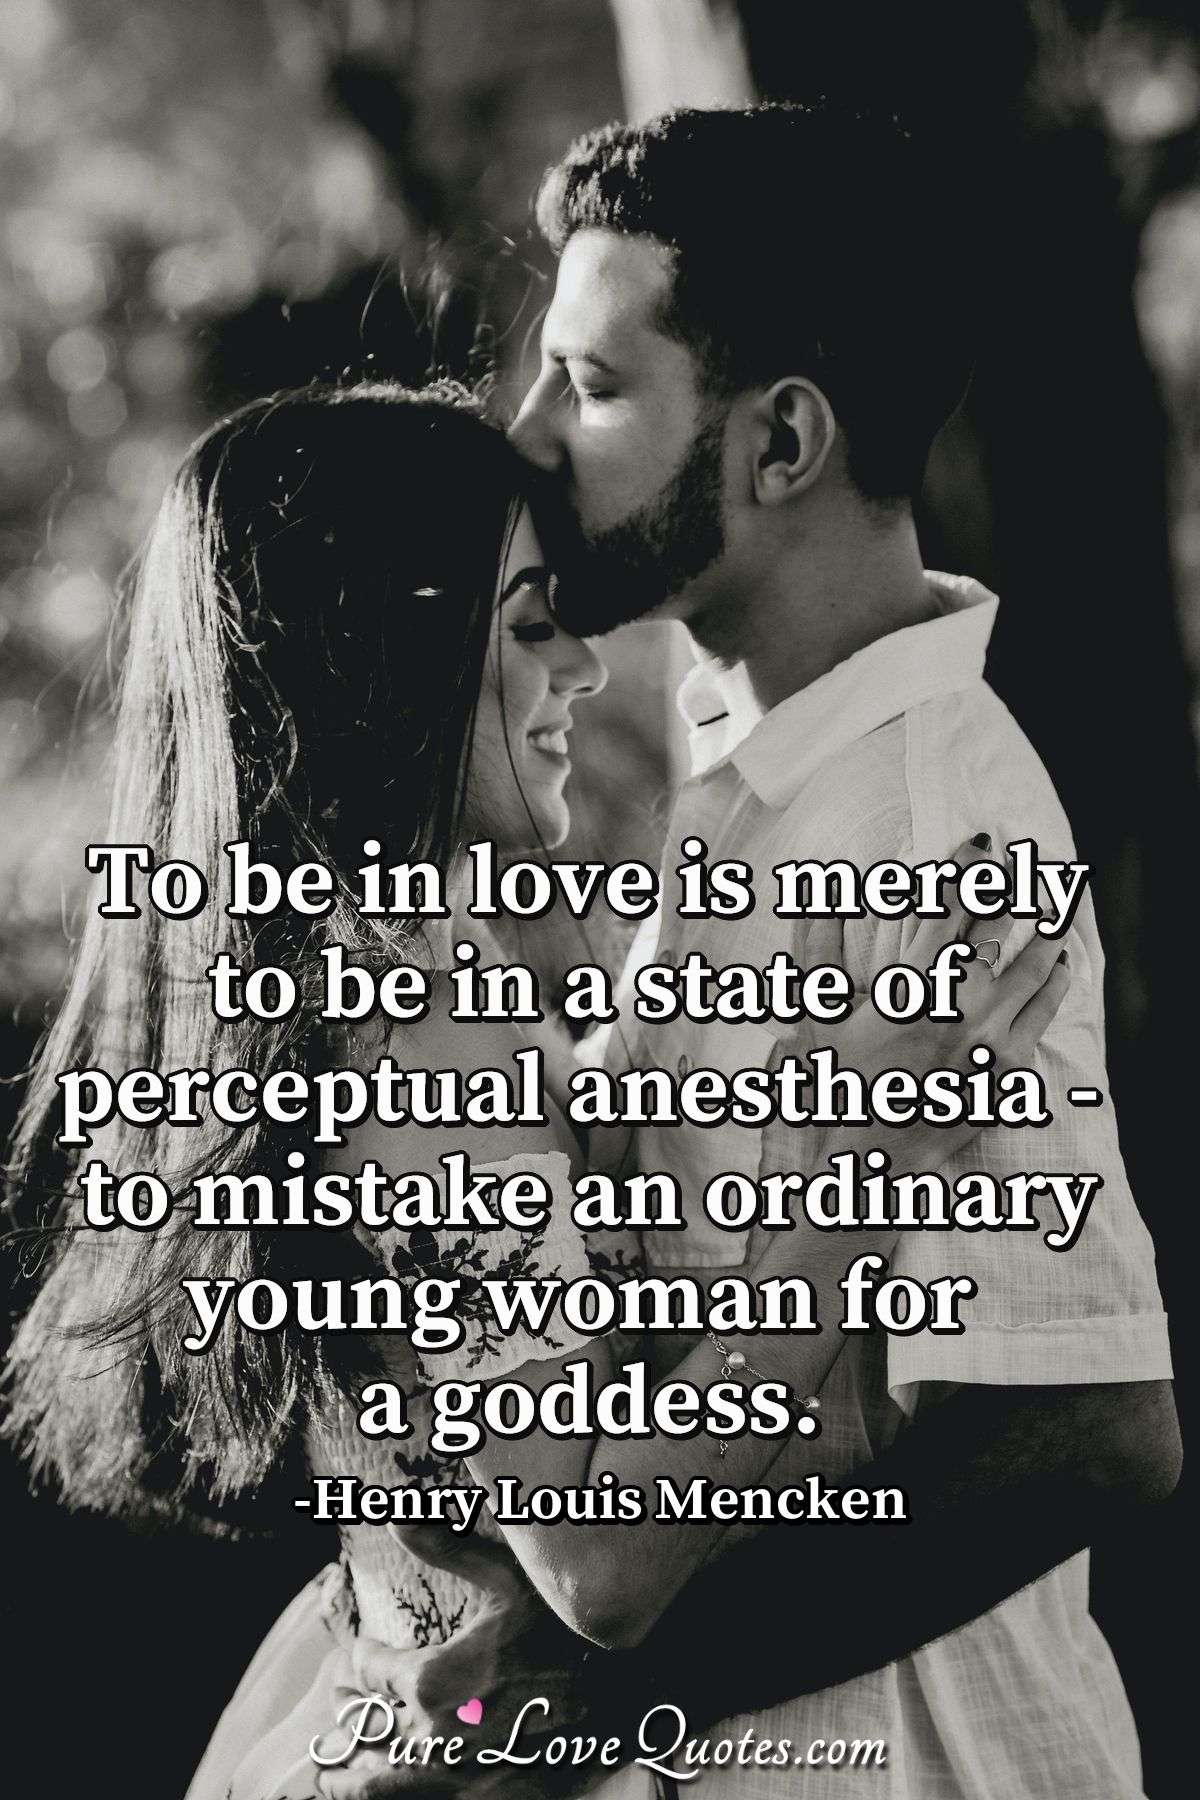 To be in love is merely to be in a state of perceptual anesthesia - to mistake an ordinary young woman for a goddess. - Henry Louis Mencken